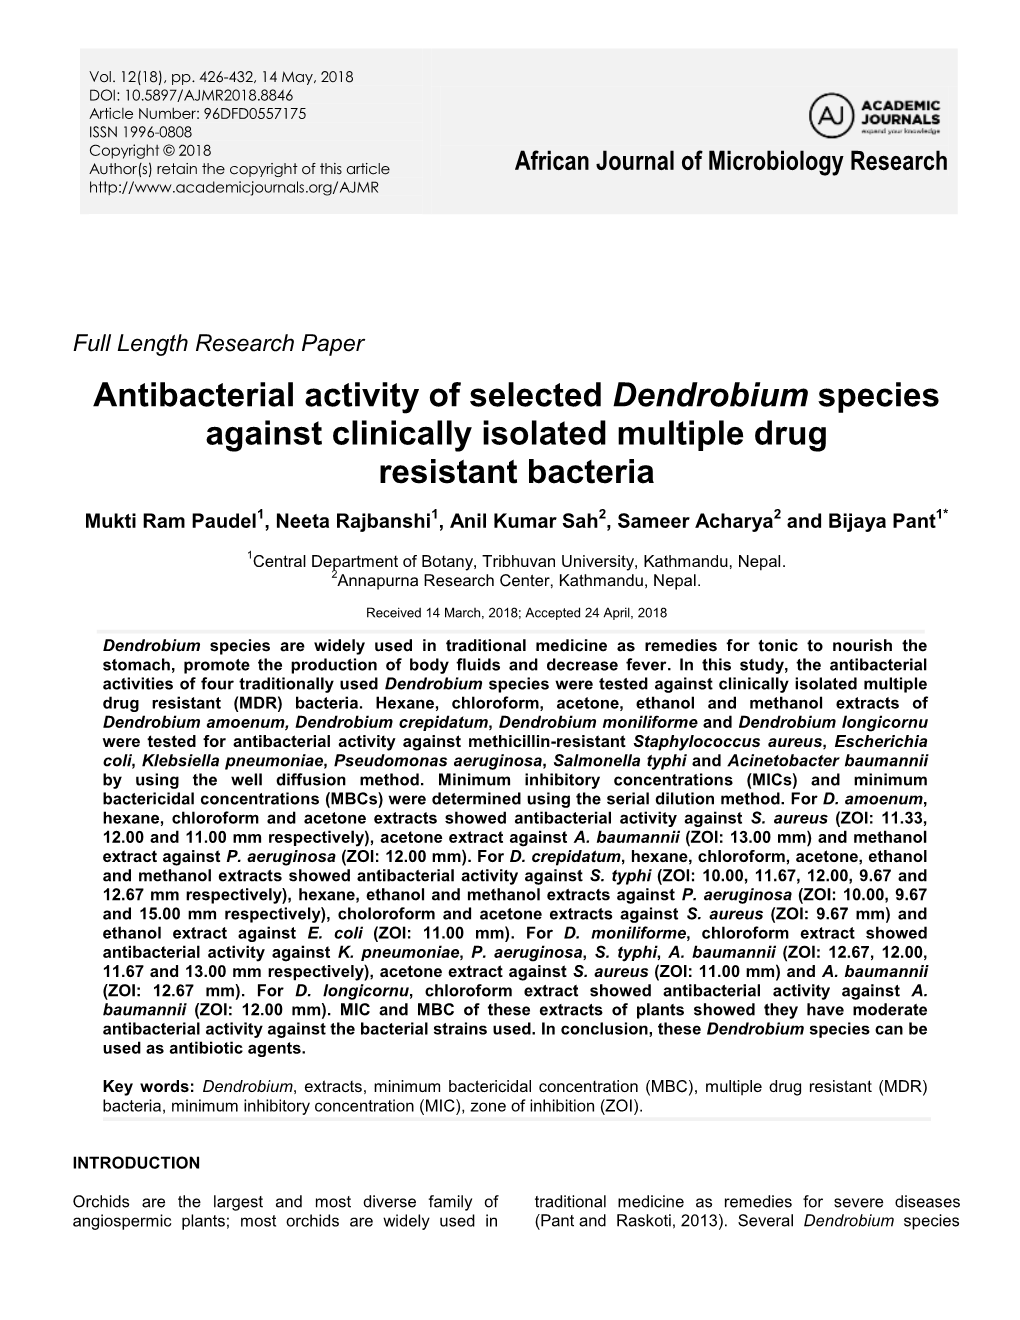 Antibacterial Activity of Selected Dendrobium Species Against Clinically Isolated Multiple Drug Resistant Bacteria